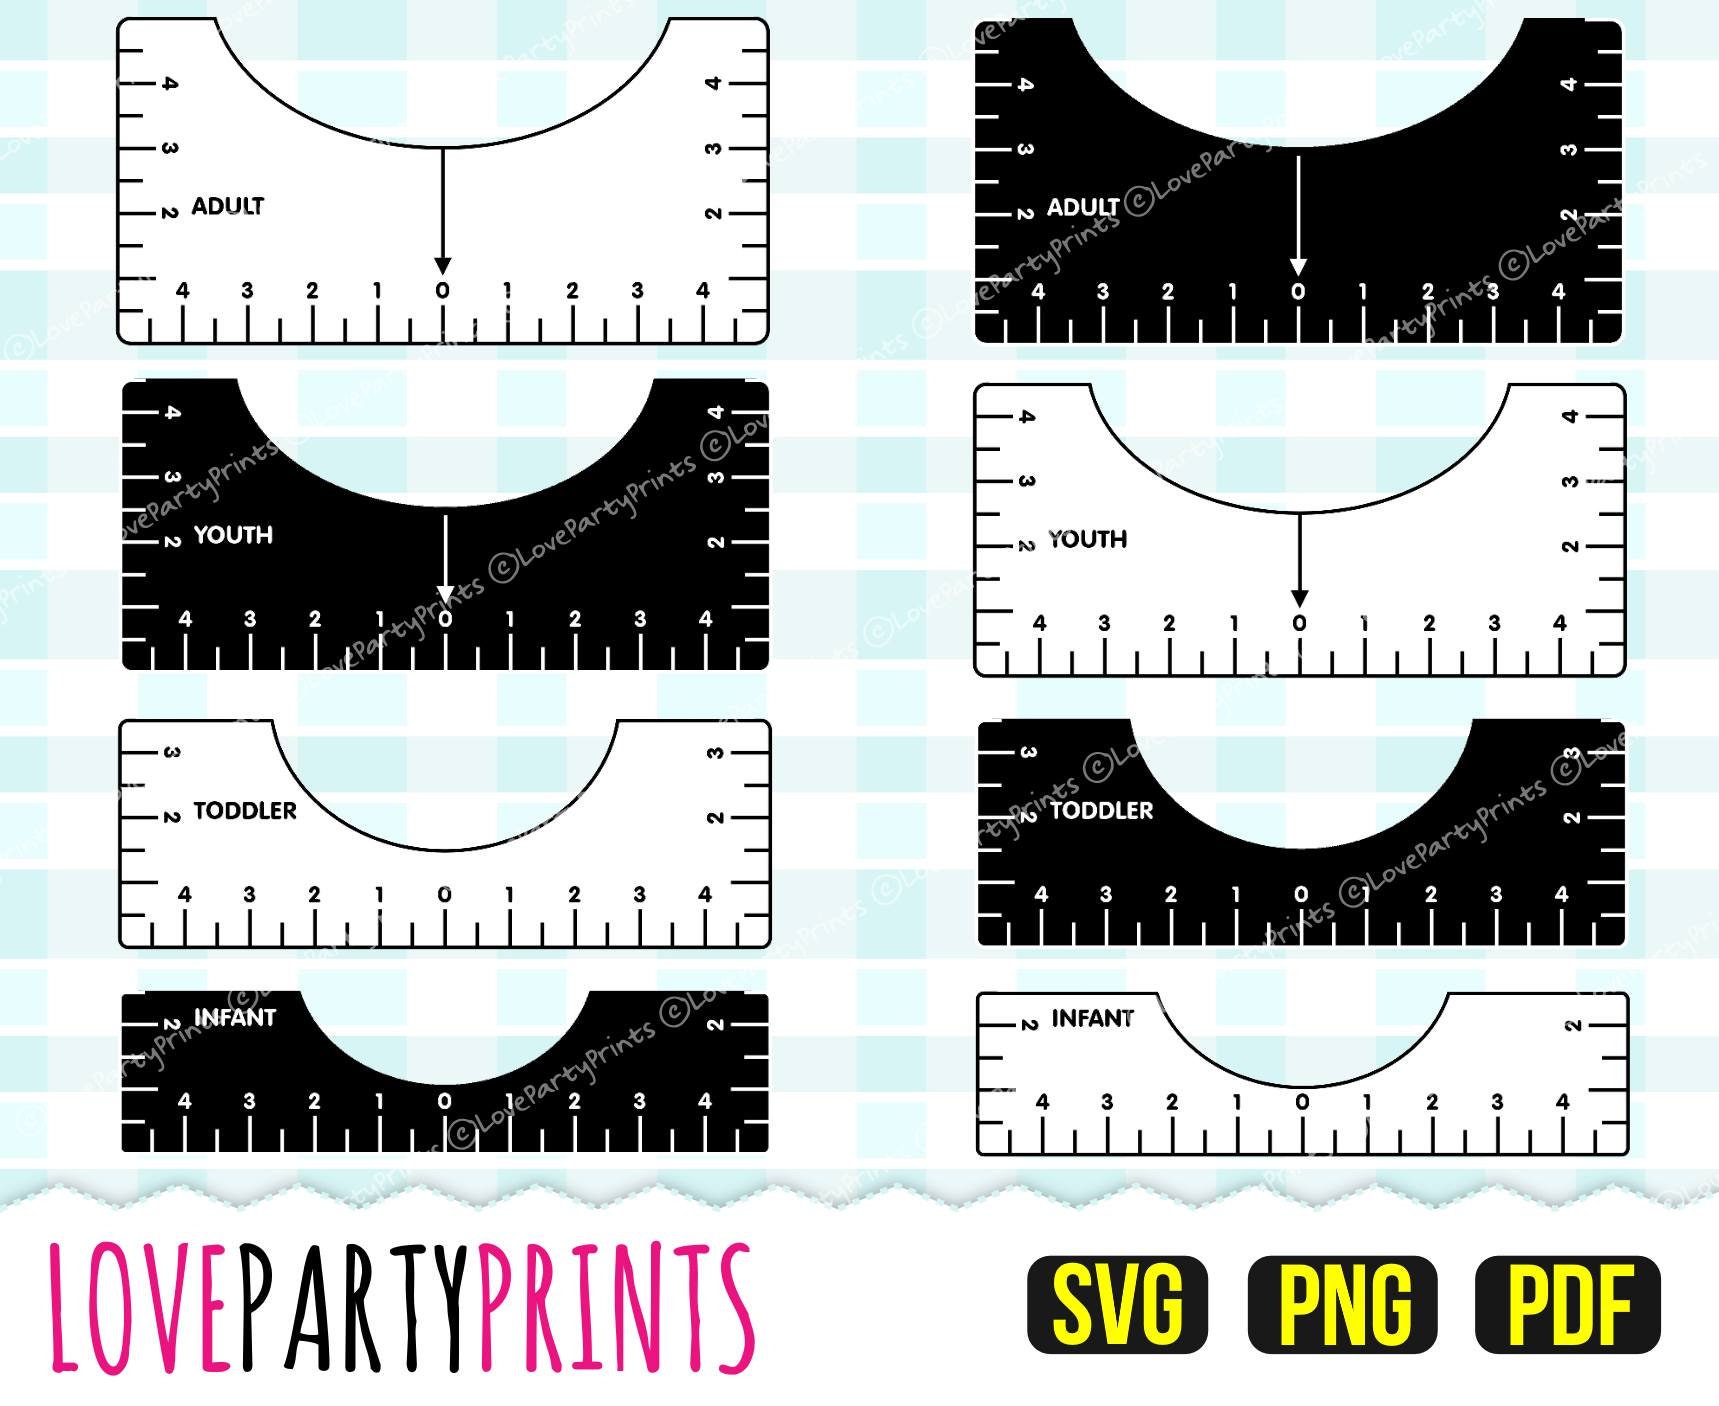 T Shirt Alignment Tool SVG, T-shirt Ruler Guide Printable, T-shirt Ruler  Template PDF, T Shirt Ruler Bundle, Alignment Tool Dxf, Png, Pdf 